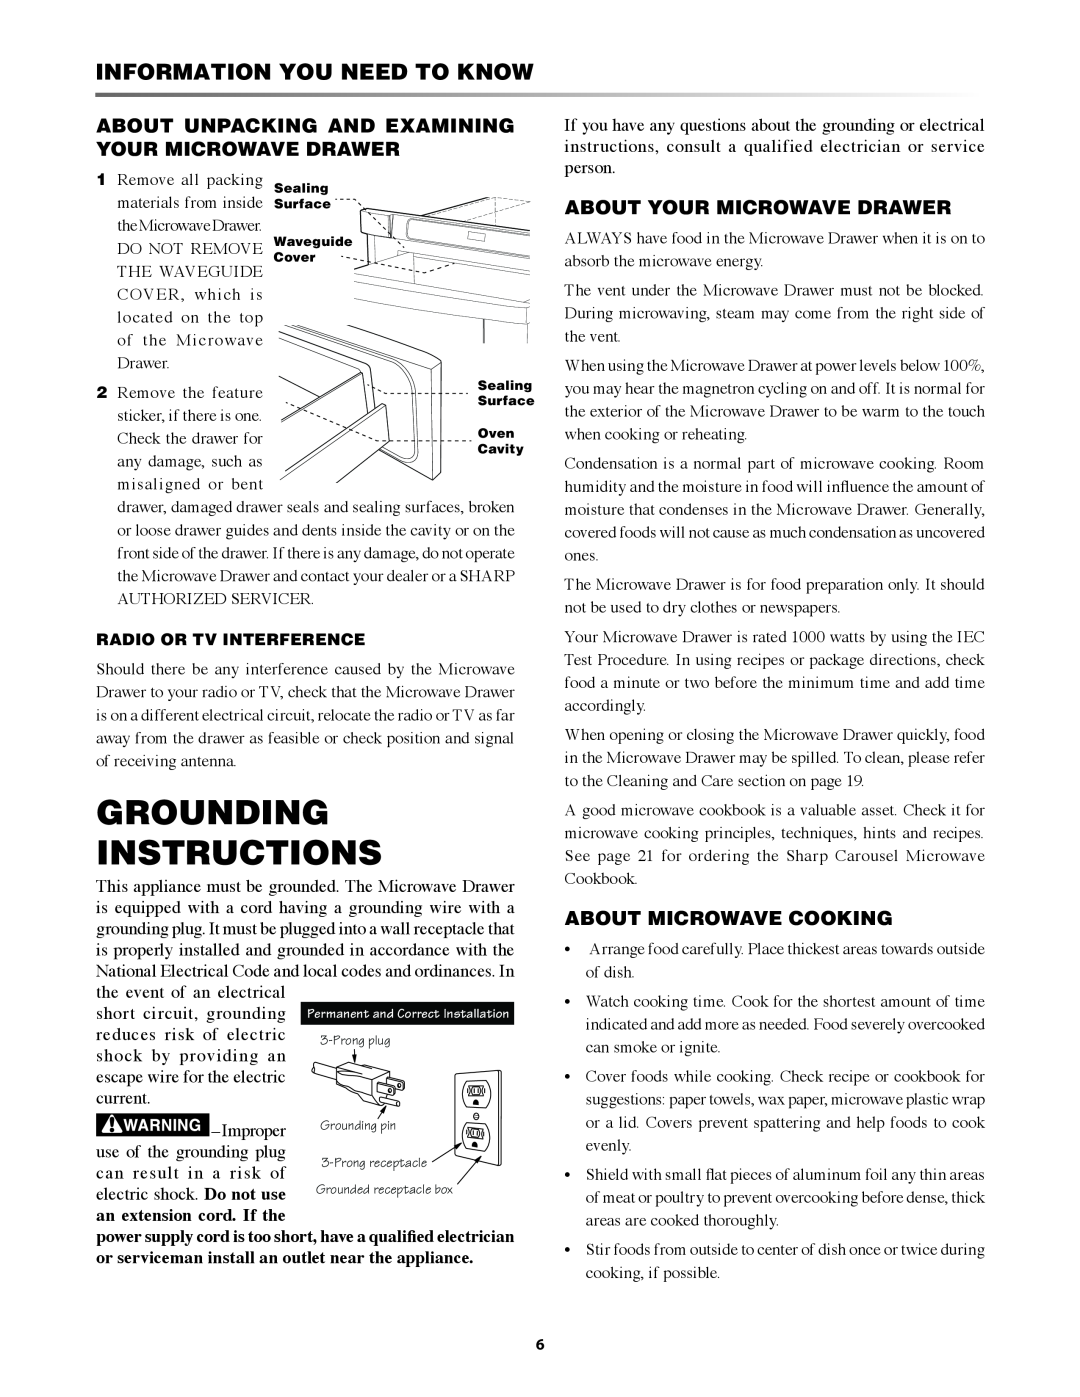 Sharp KB-6525P Grounding Instructions, Information You Need To know, About Unpacking and Examining Your Microwave Drawer 